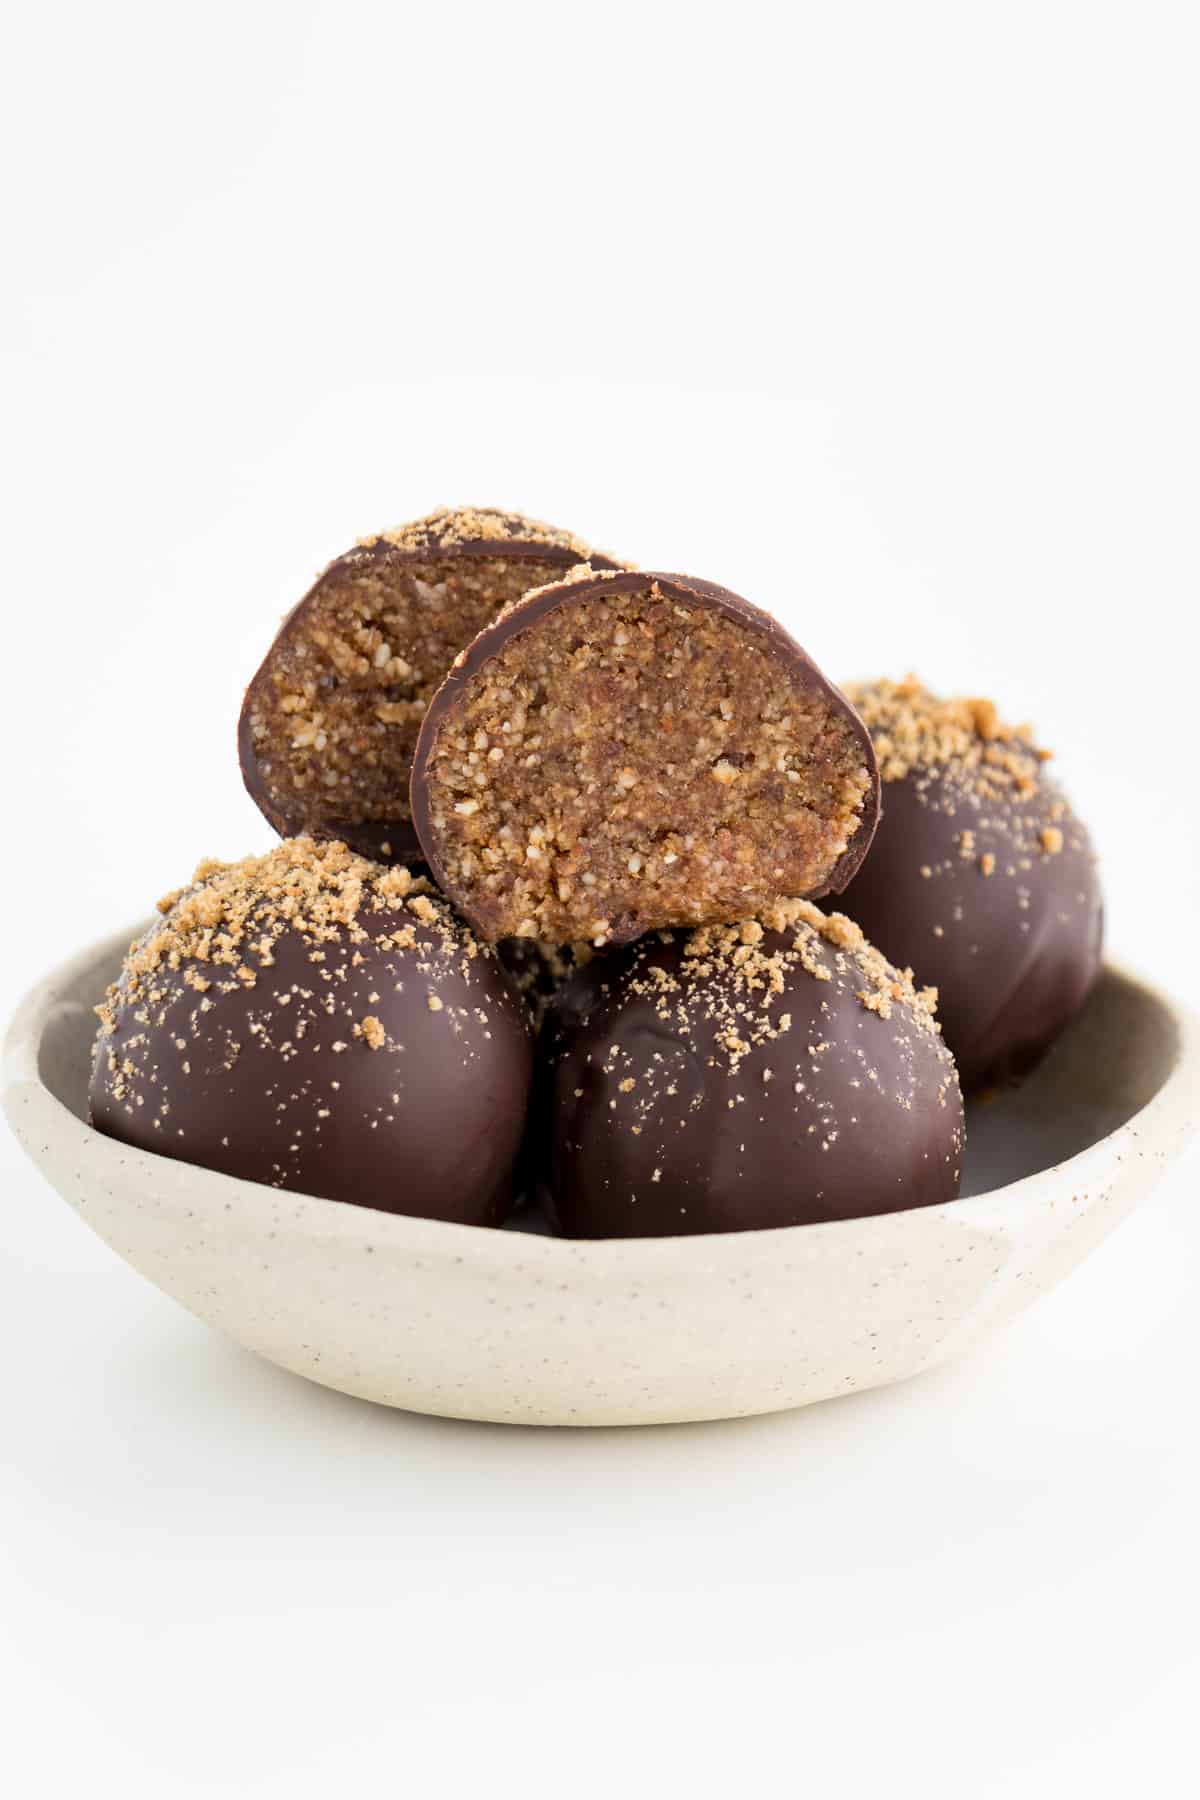 chocolate gingerbread truffles stacked inside a white and cream ceramic bowl